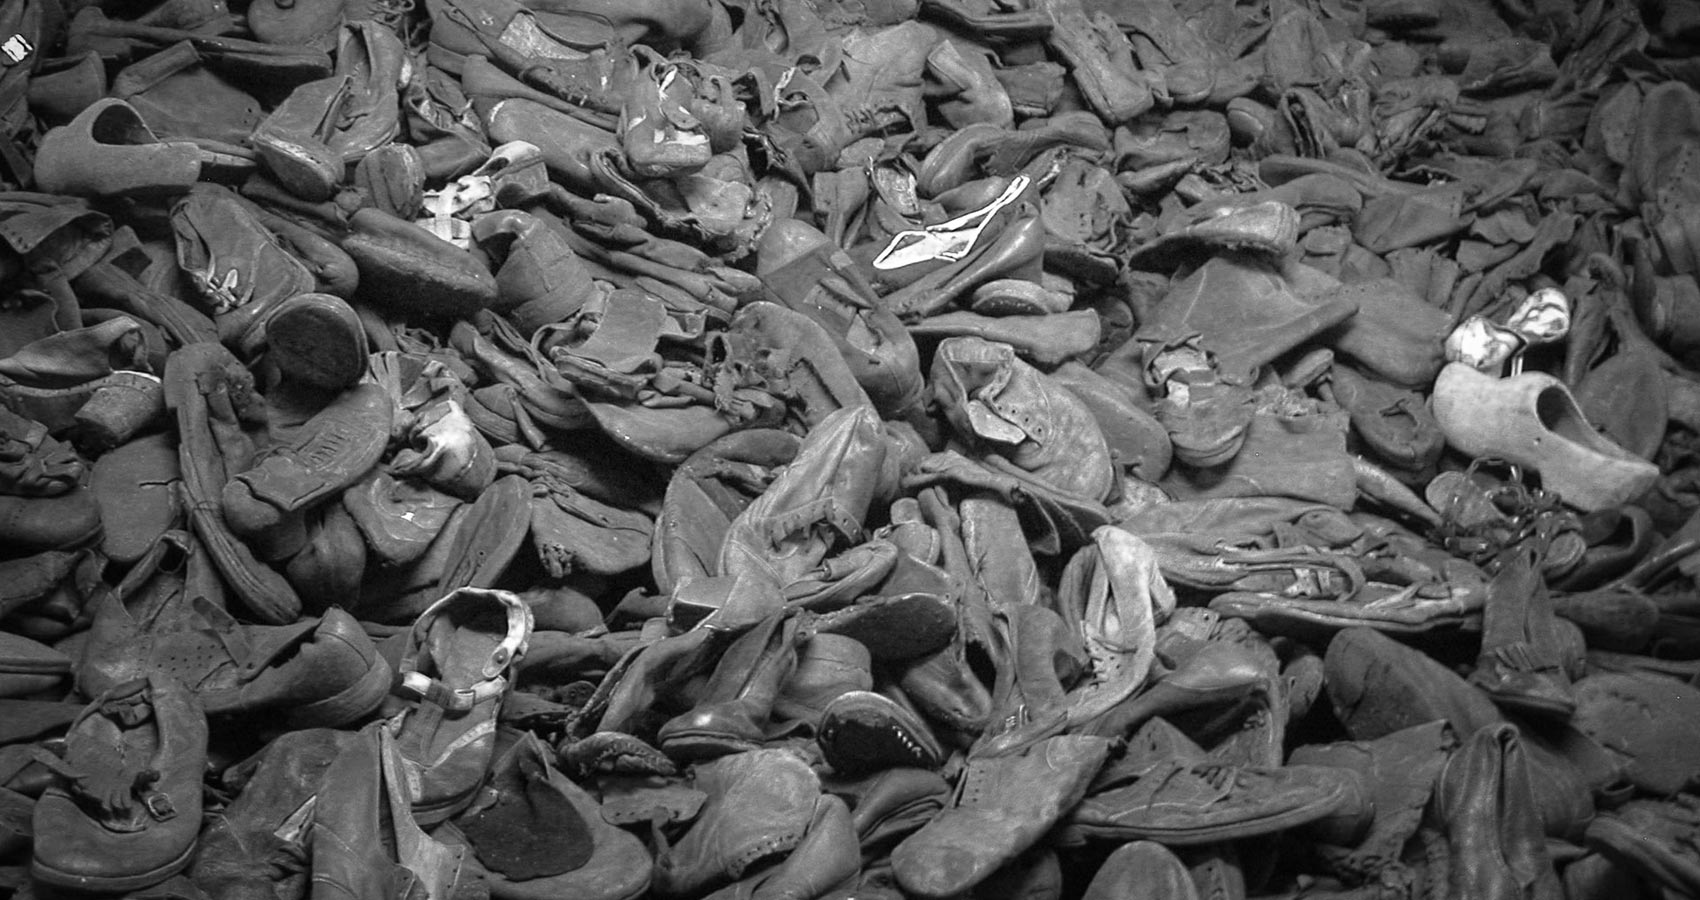 110,000 Pairs of Shoes, a poem by Aurora Kastanias at Spillwords.com